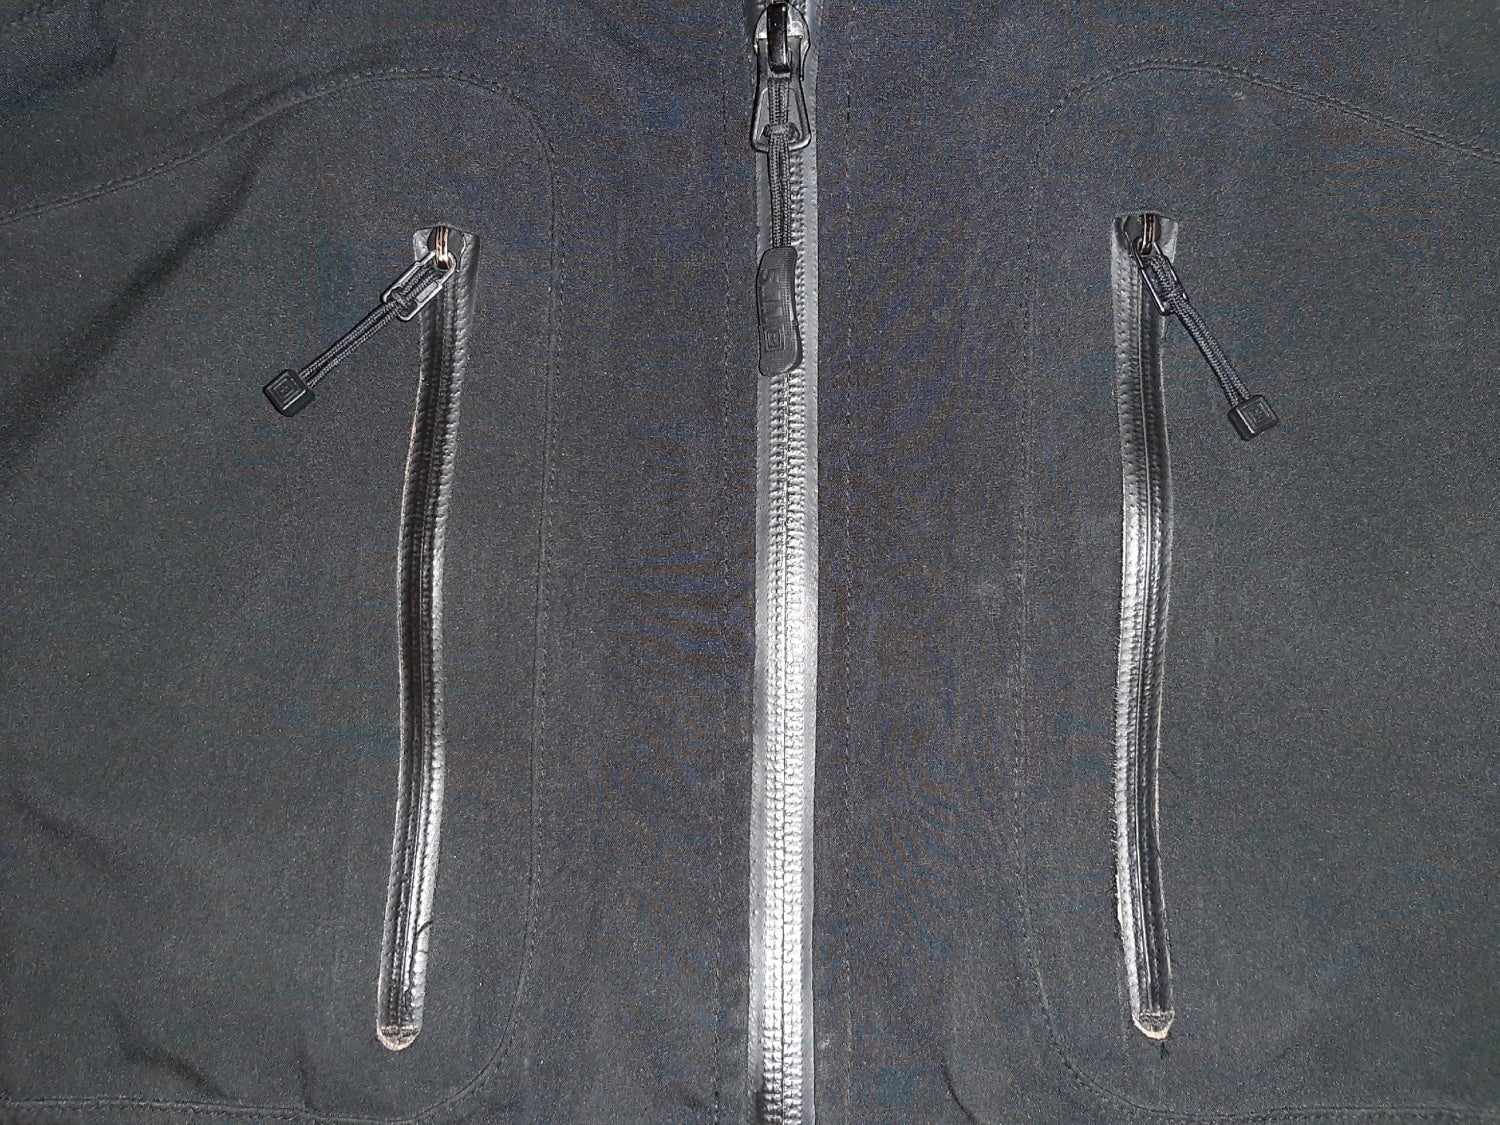 All pockets have waterproof zippers. And this is how they look after 7 years.